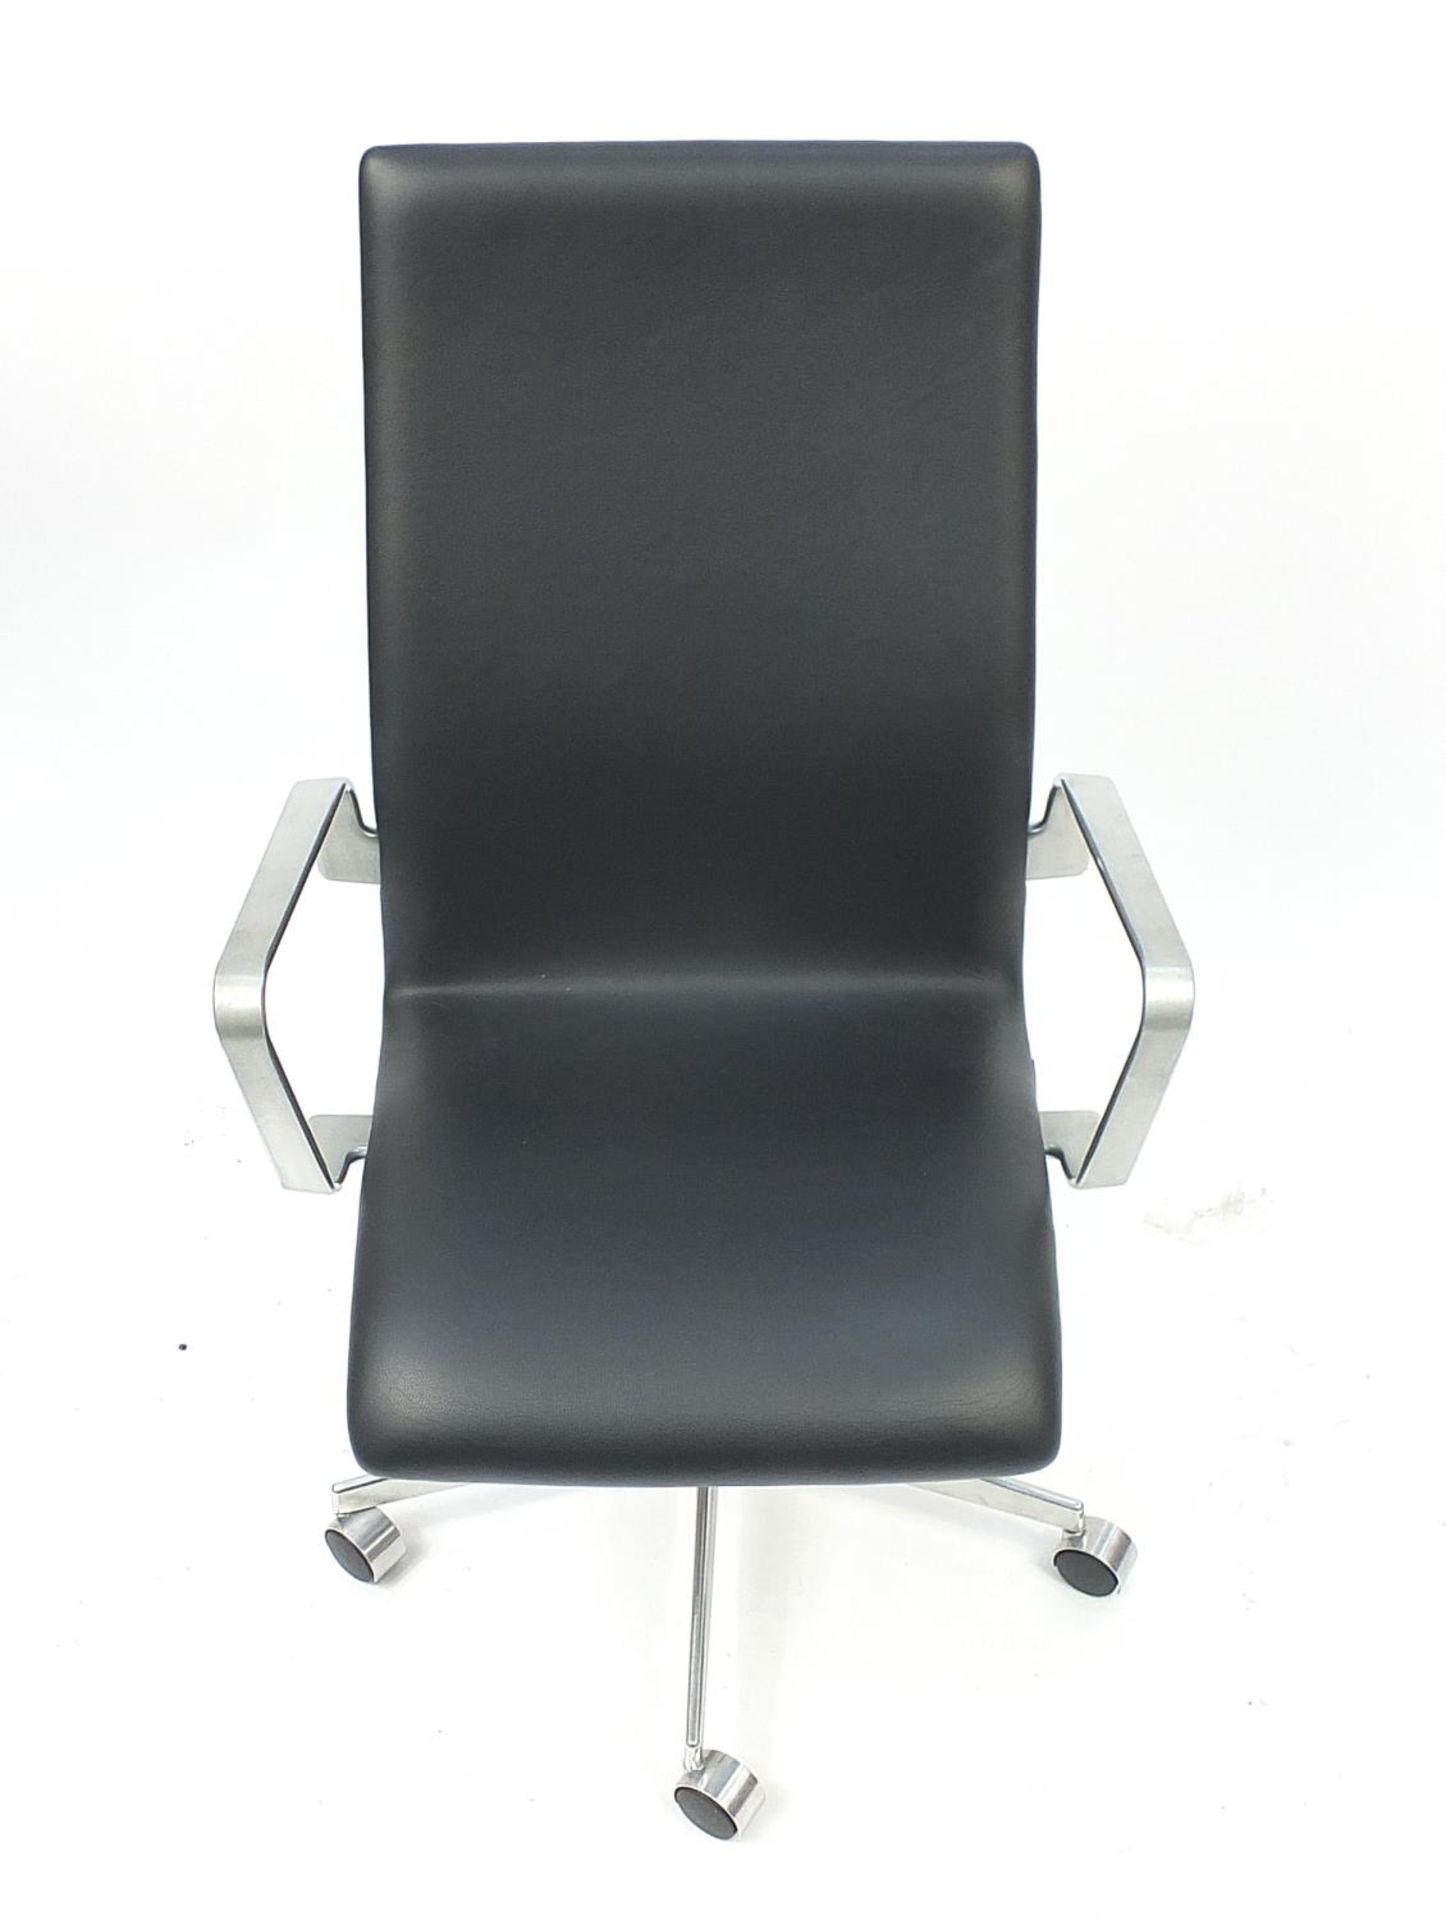 Arne Jacobsen for Fritz Hansen, 3273C Oxford armchair, 105cm high (OPTION) : For Further Condition - Image 3 of 5